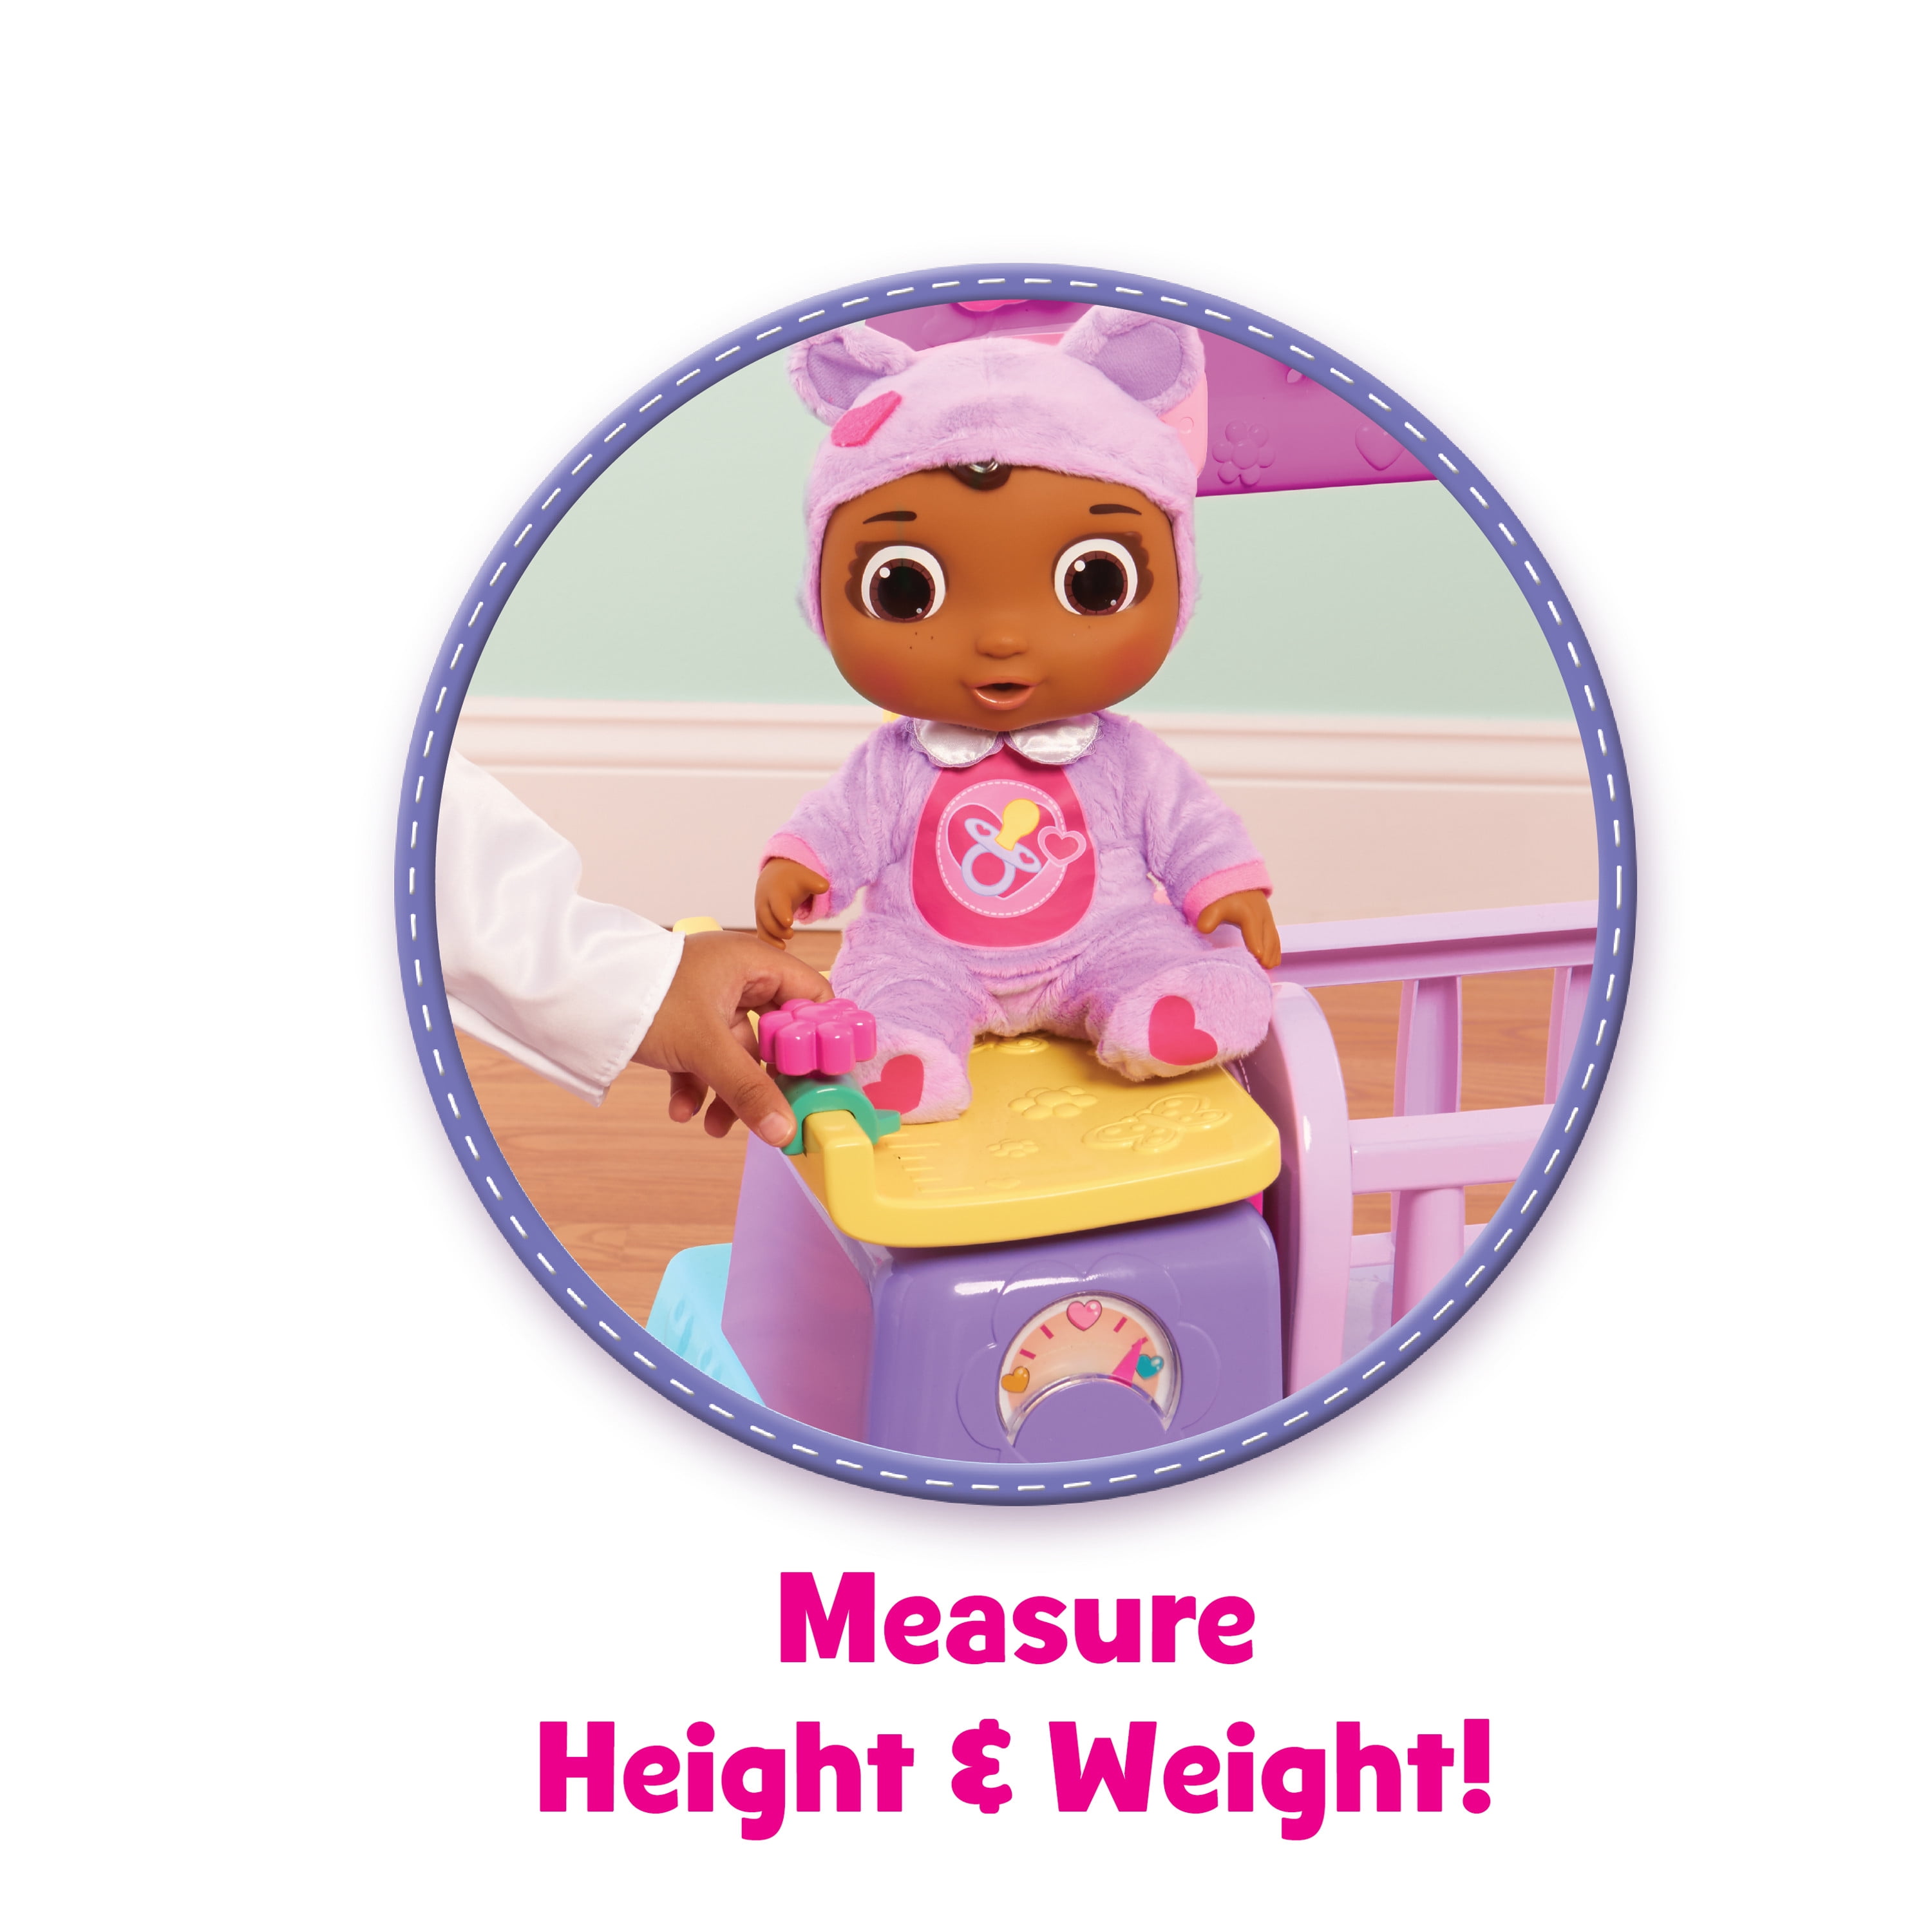 doc mcstuffins baby all in one nursery